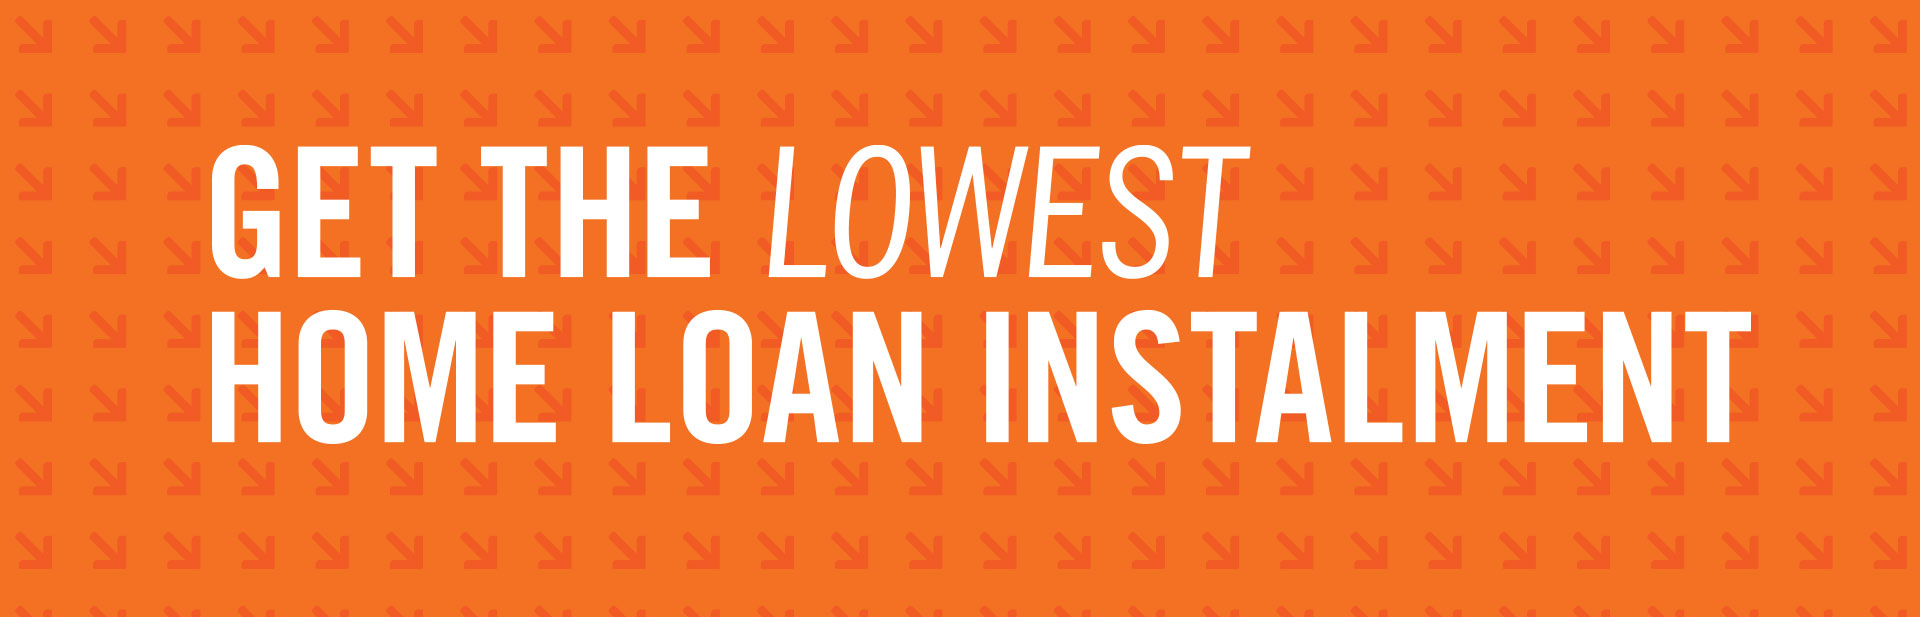 get the lowest home loan instalment